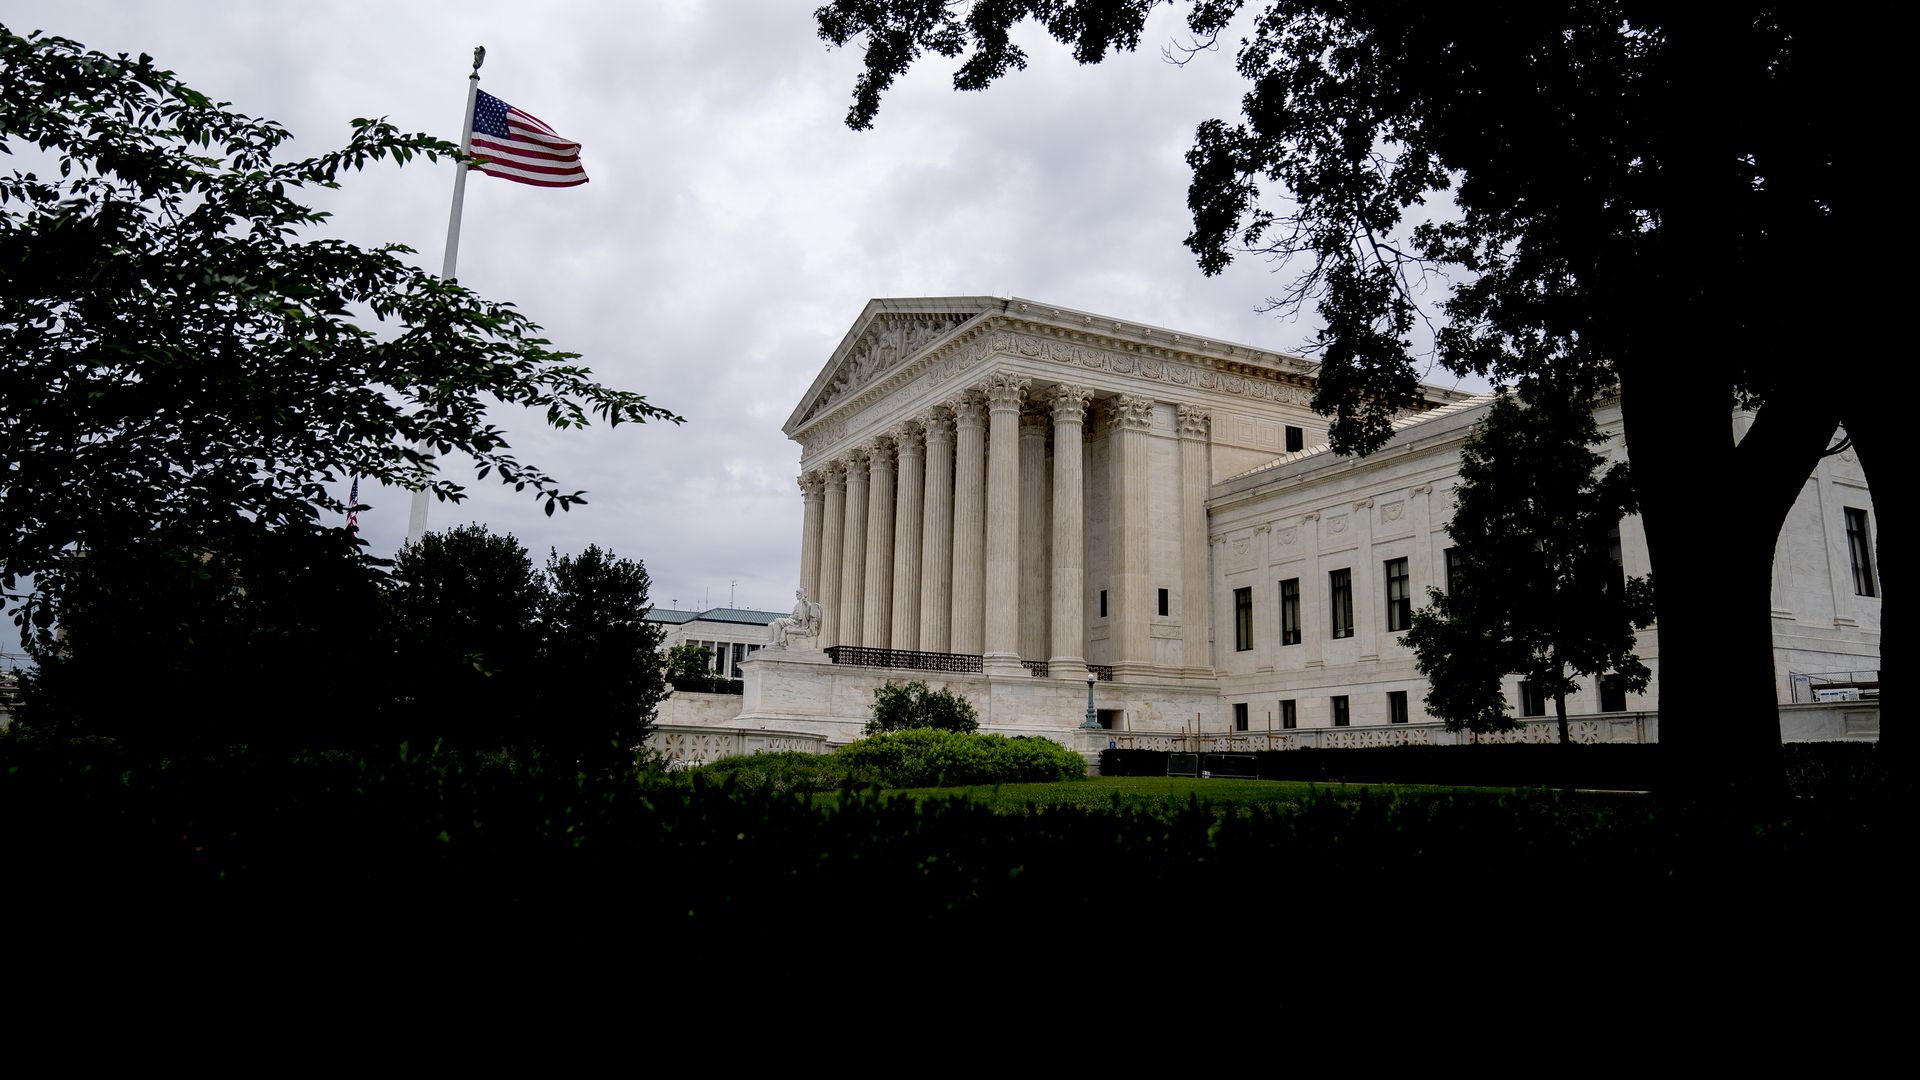 An image of the Supreme Court of the United States.